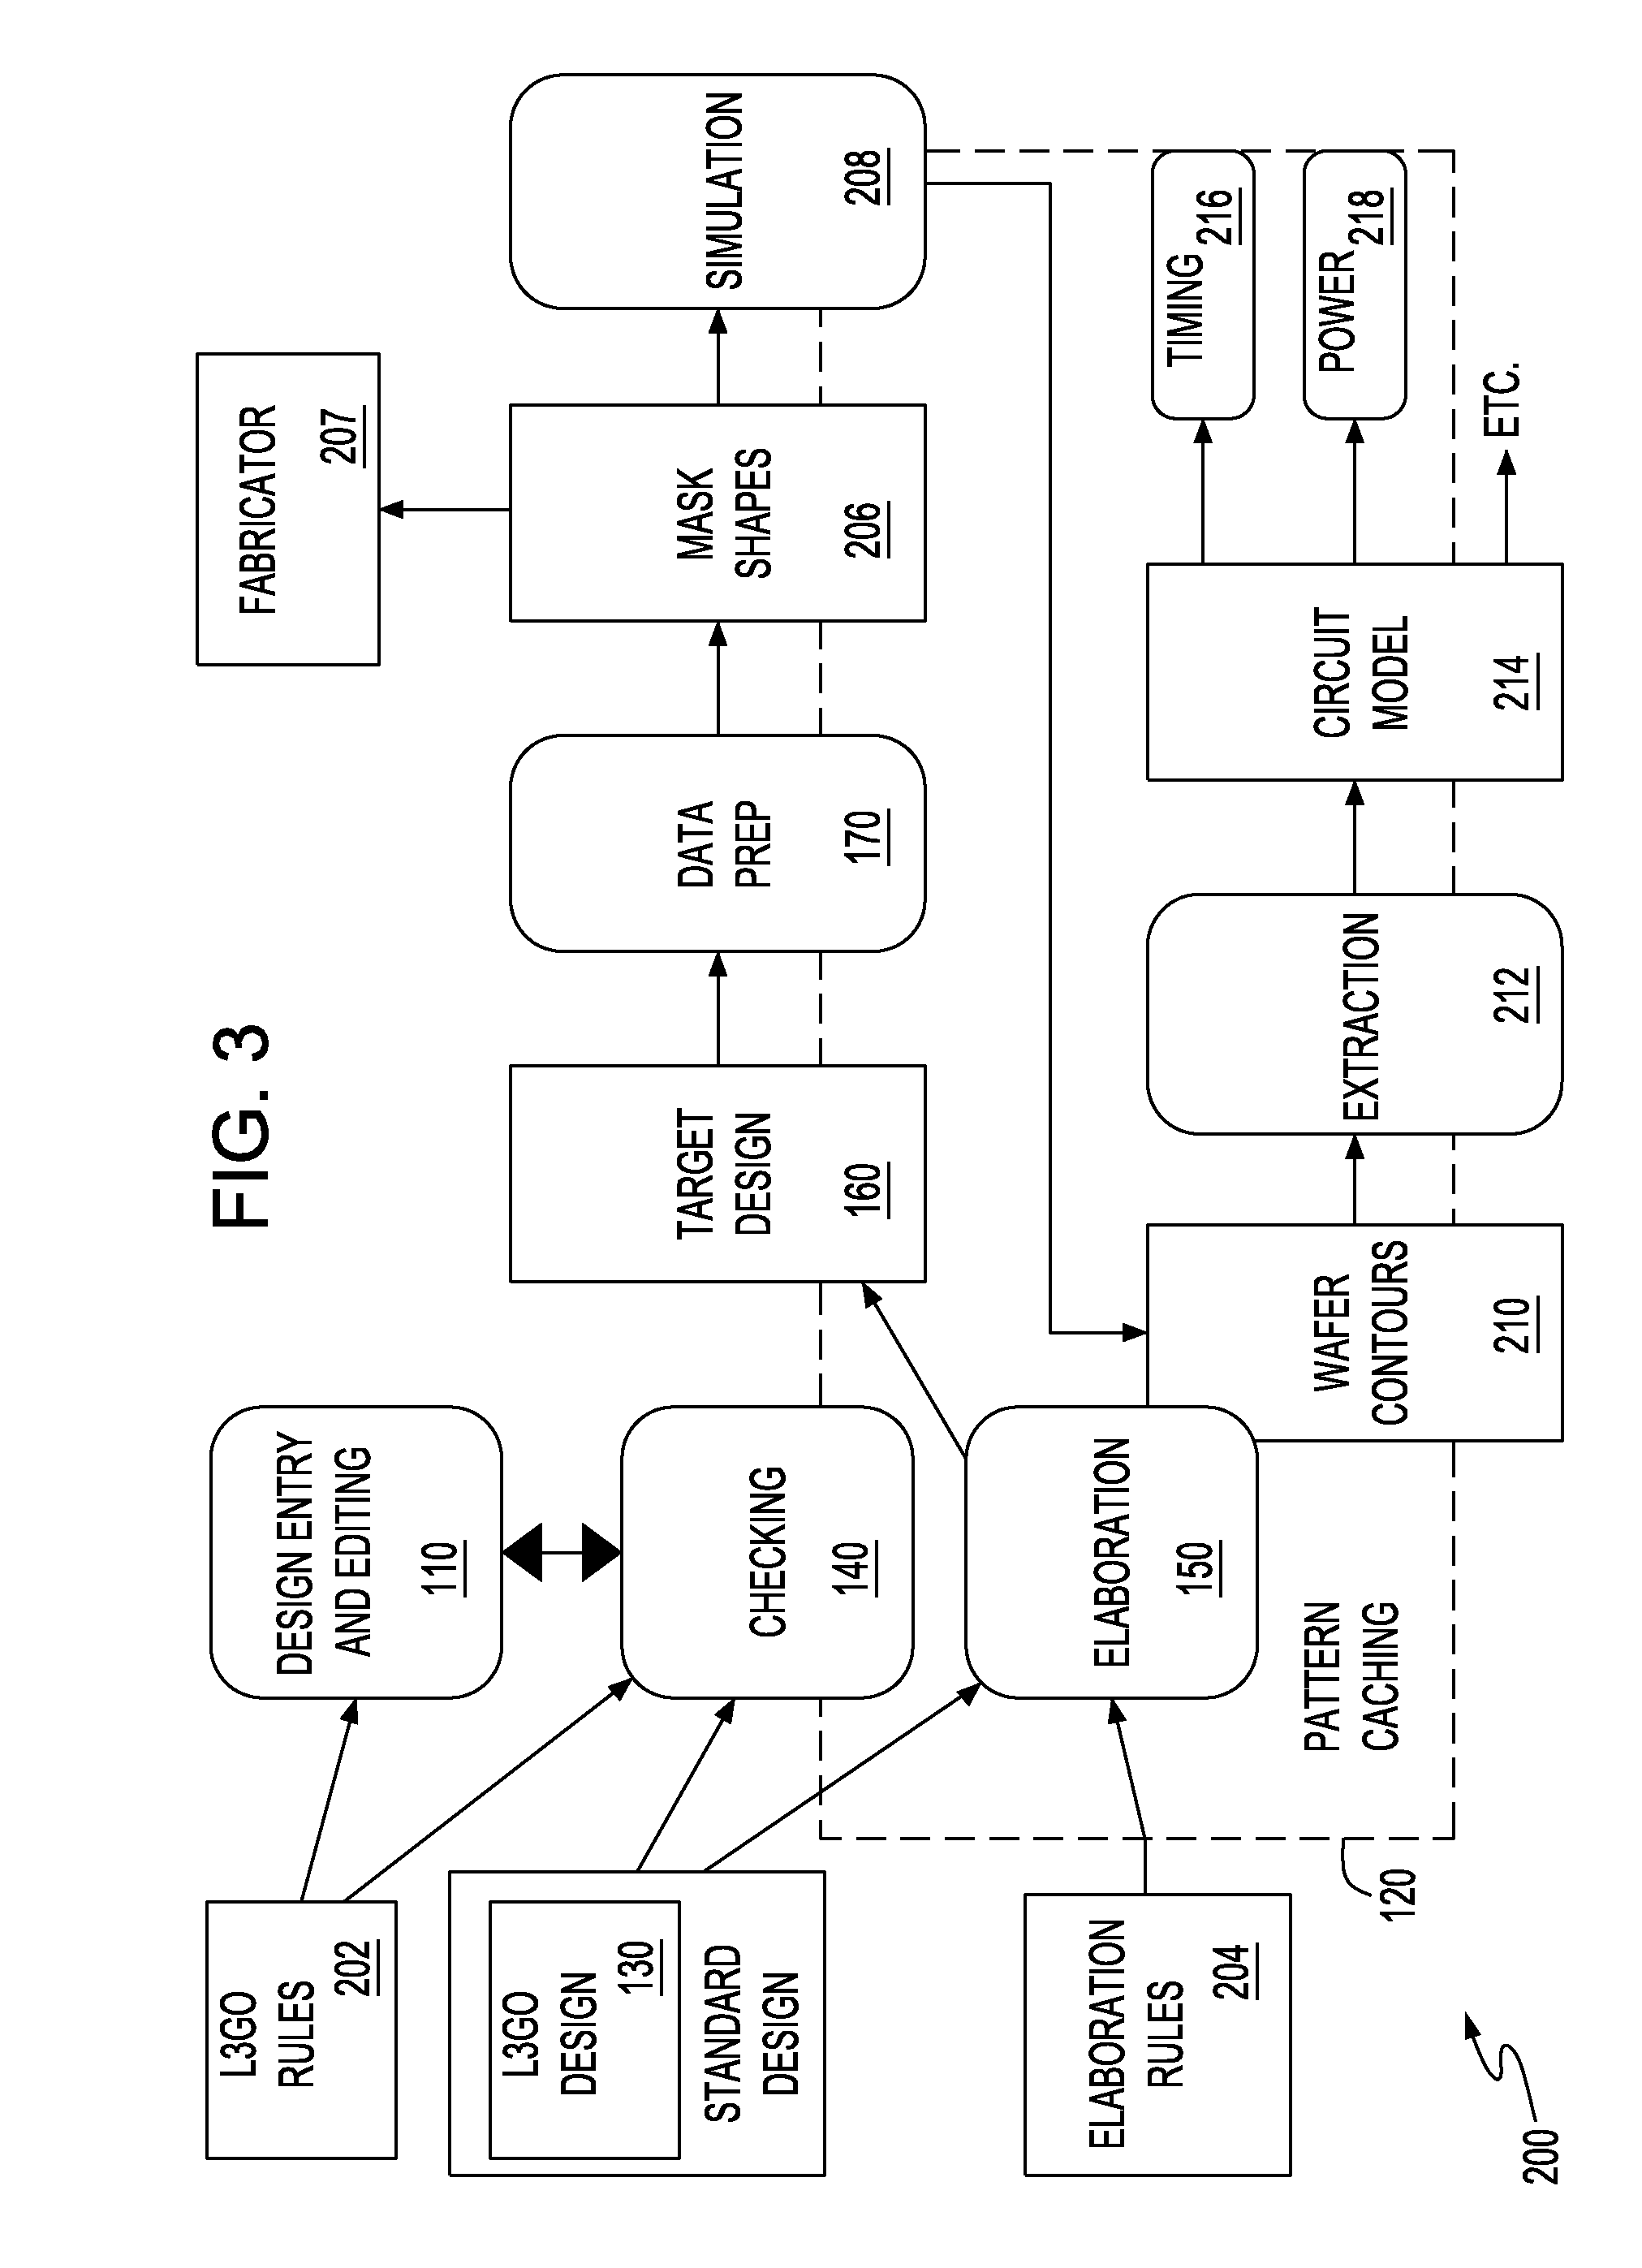 Iphysical design system and method